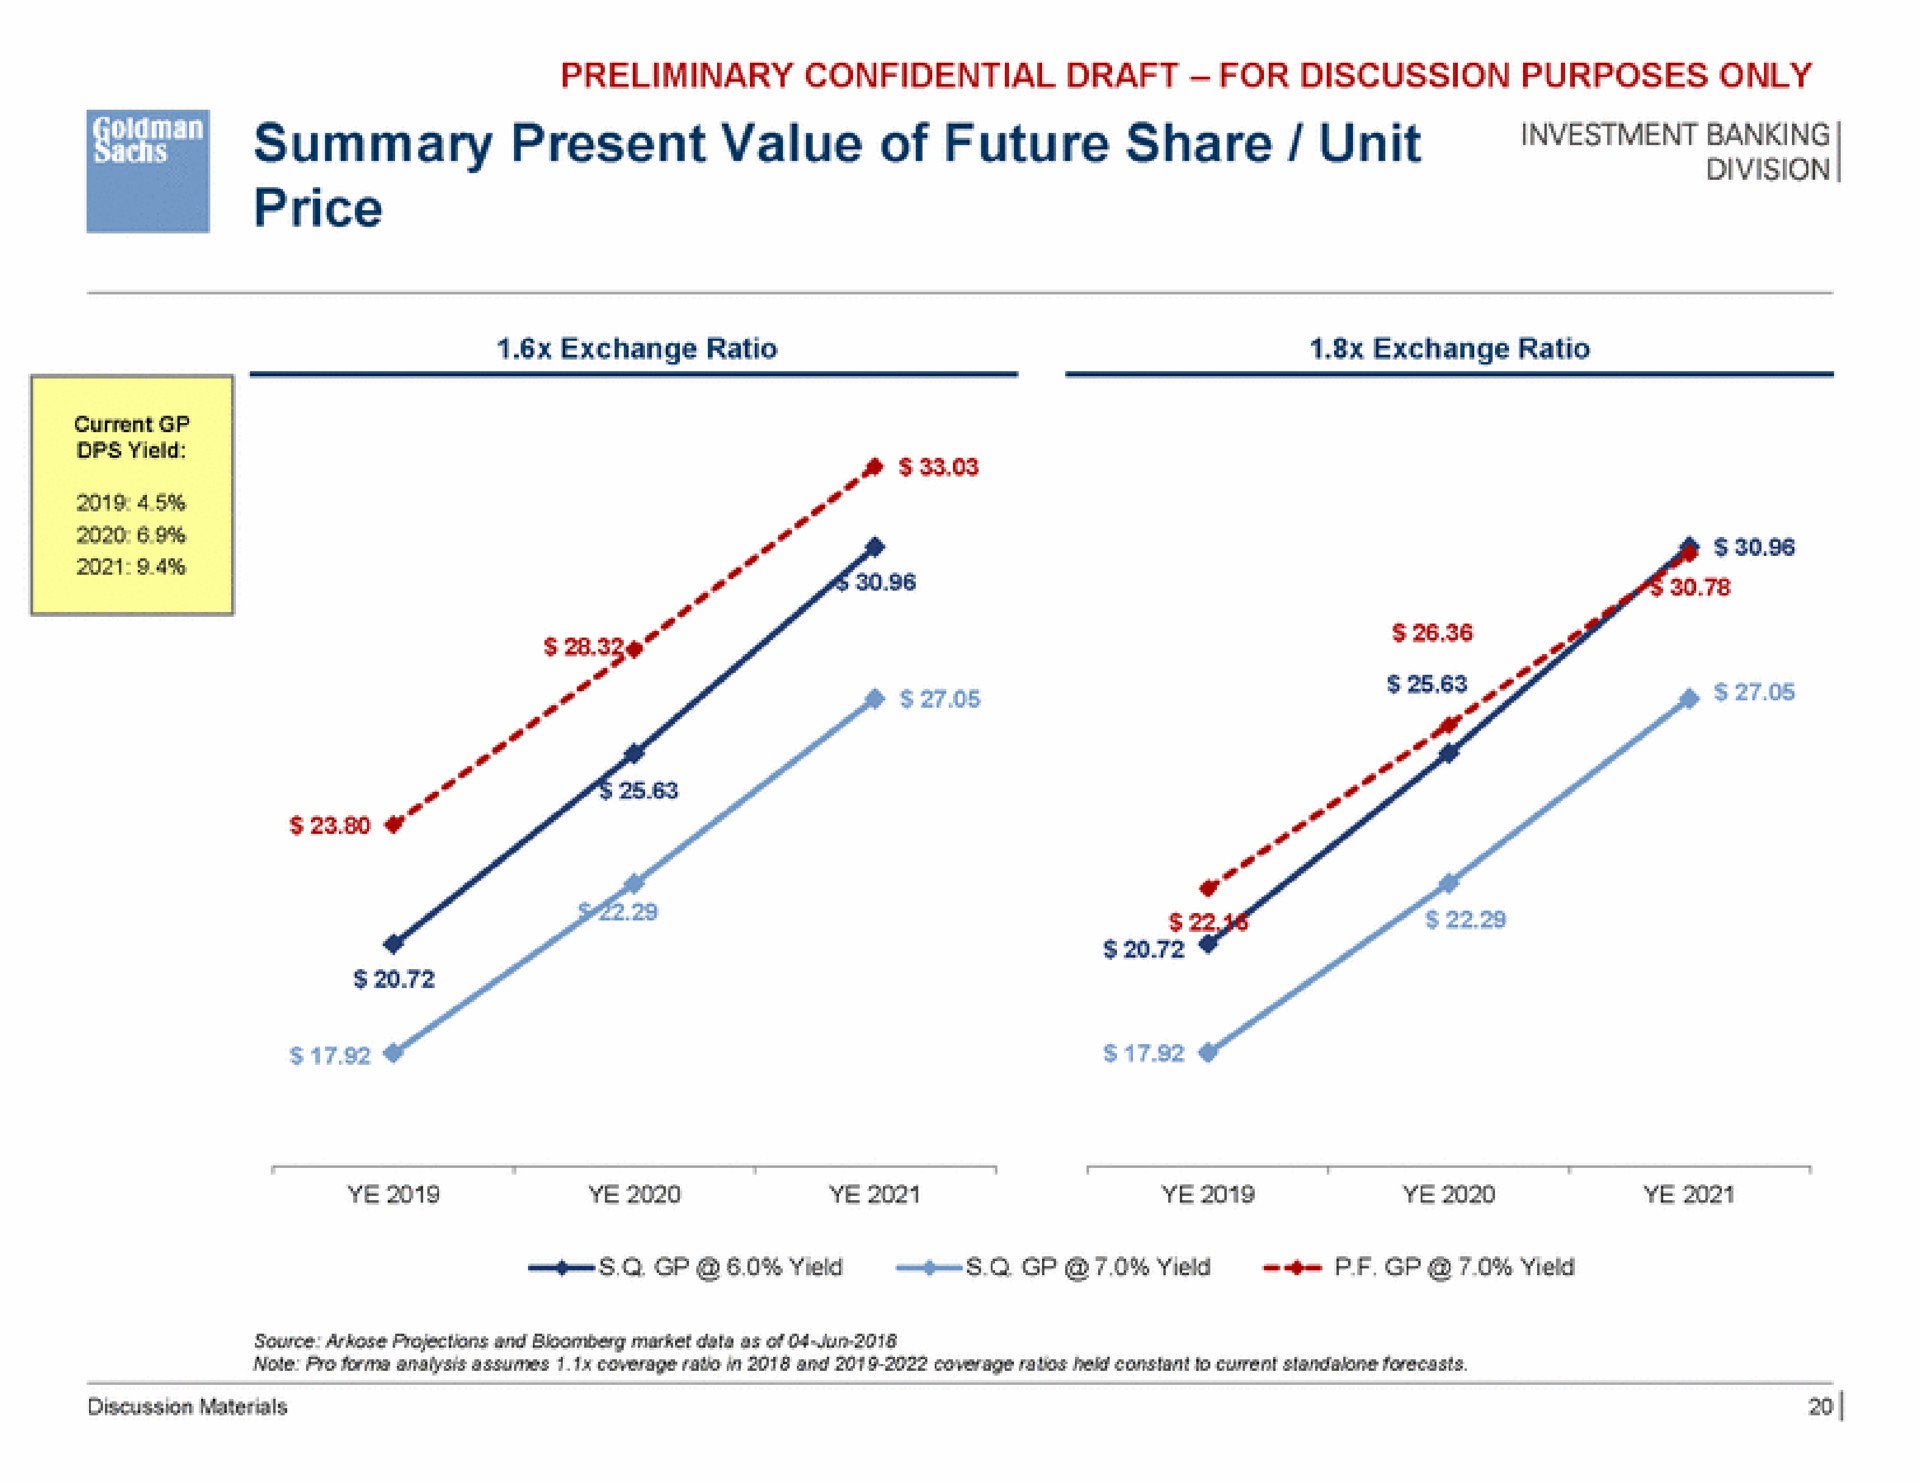 a summary present value of future share unit banking price | Goldman Sachs